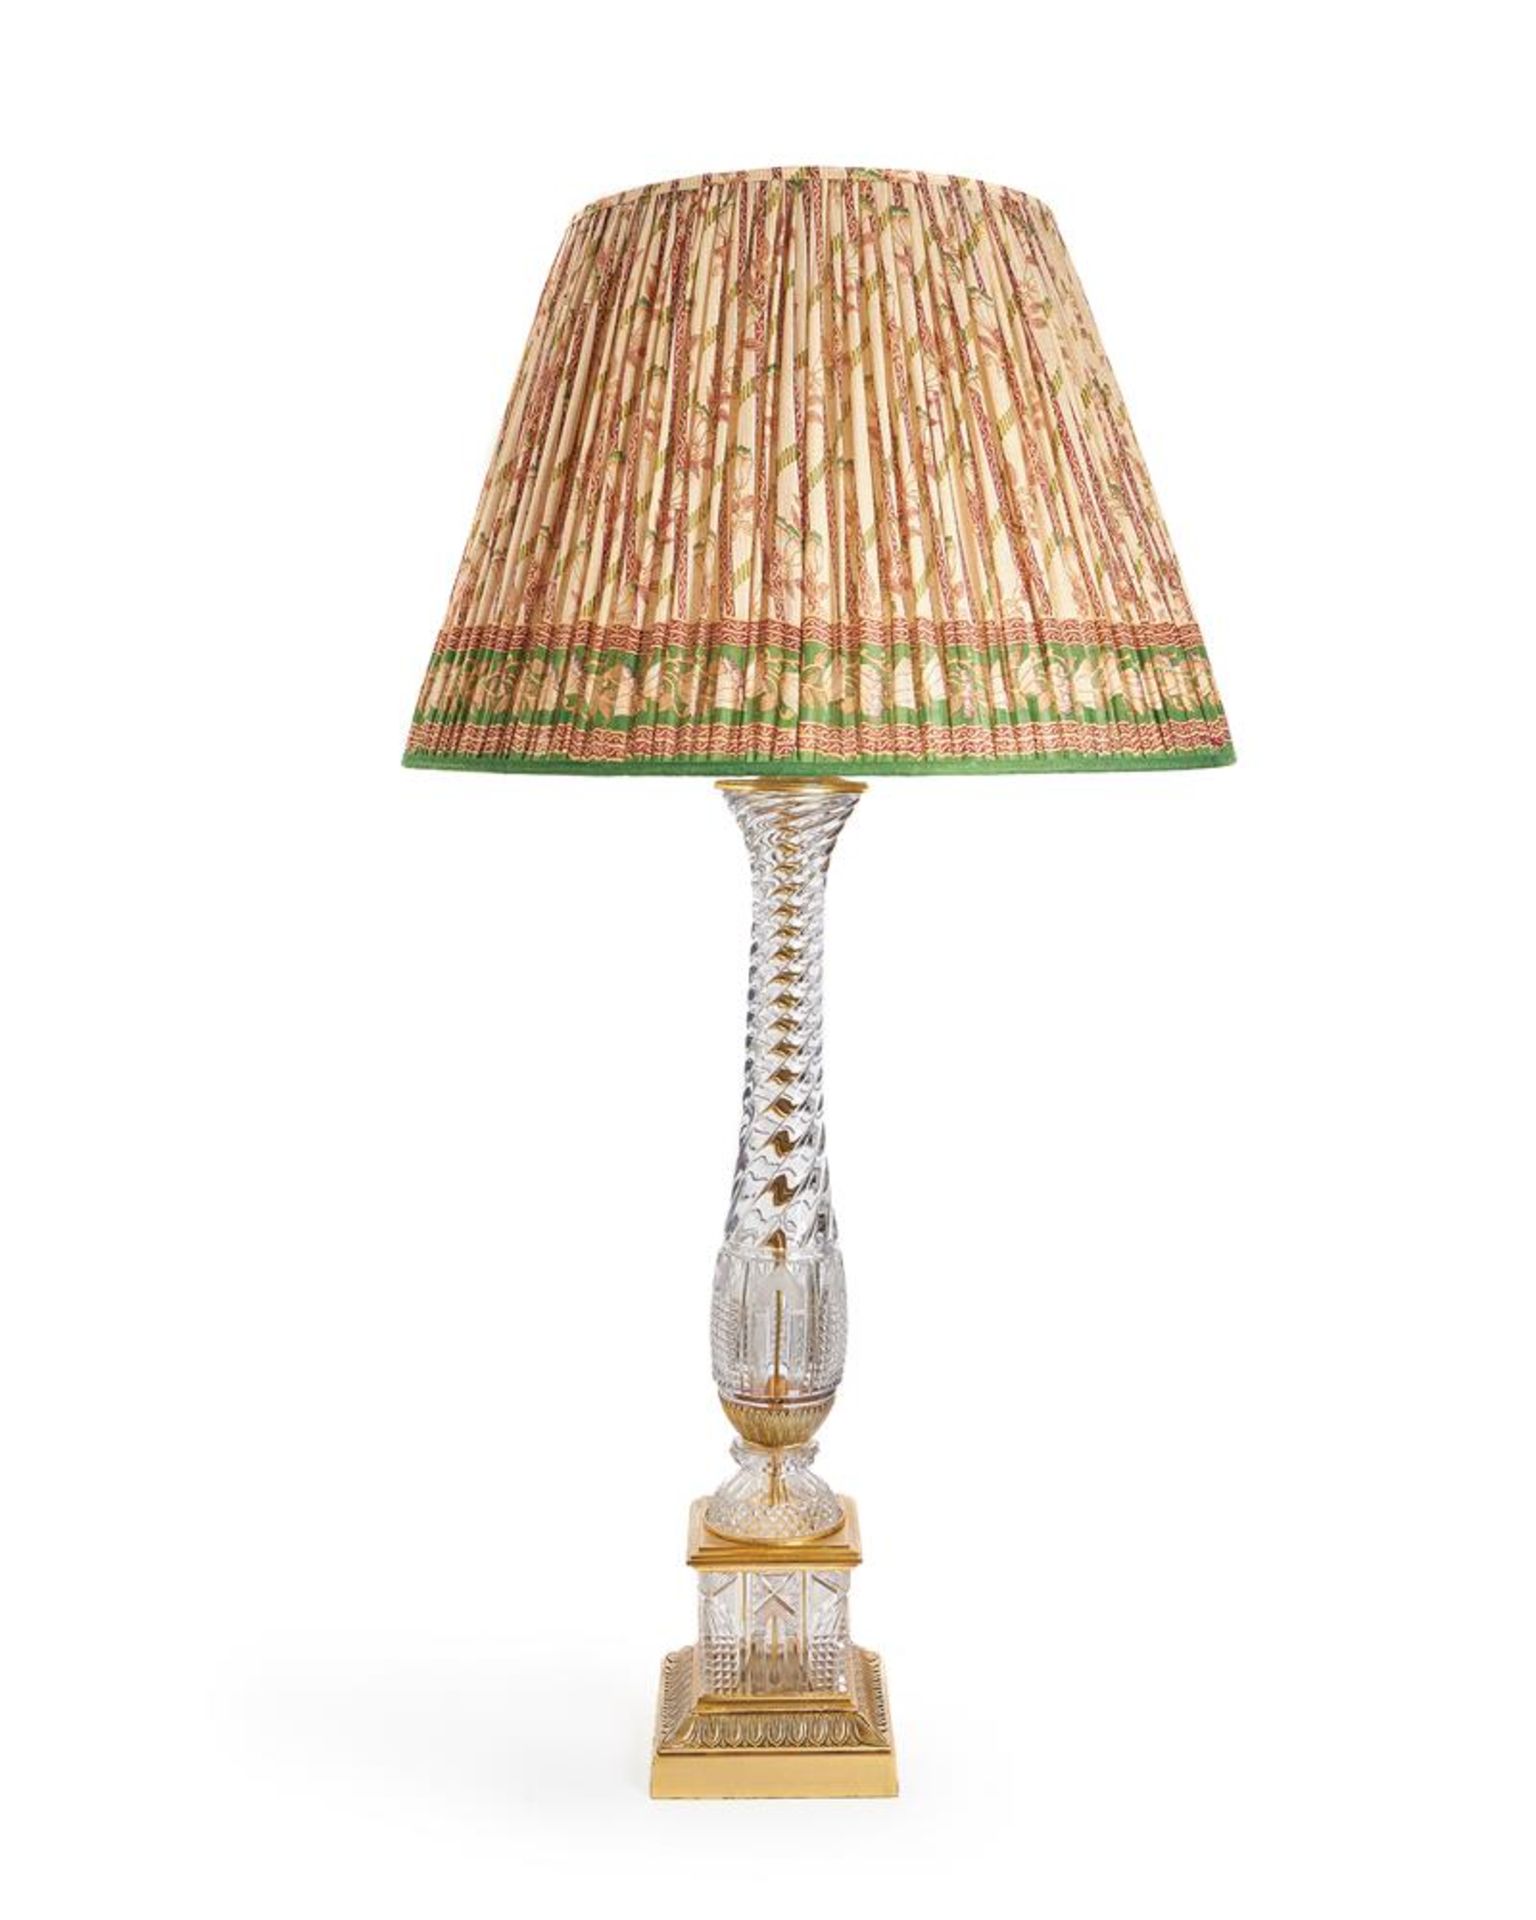 A FRENCH CUT AND MOULDED GLASS AND GILT BRONZE COLUMNAR TABLE LAMP, ATTRIBUTED TO MAISON JANSEN - Image 2 of 3